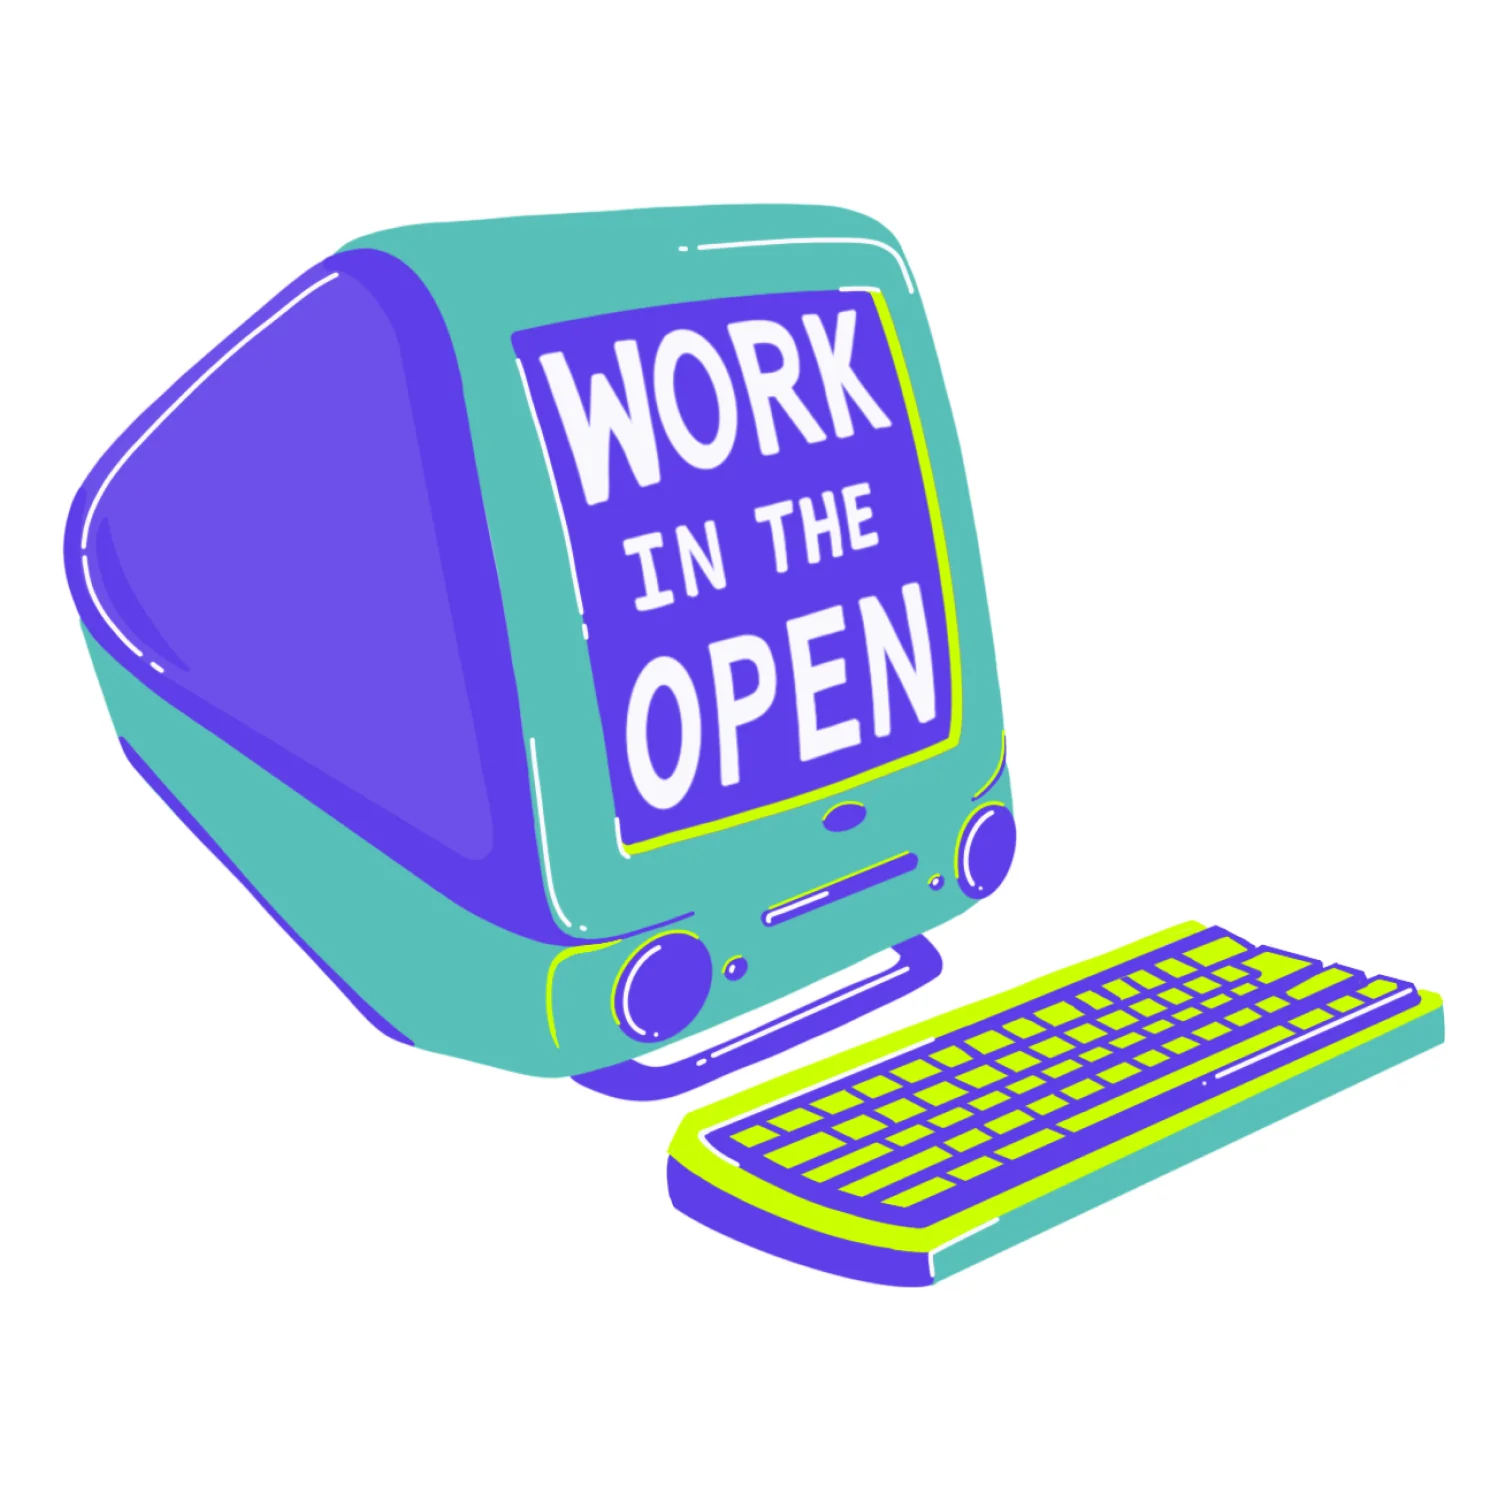 Work in the open